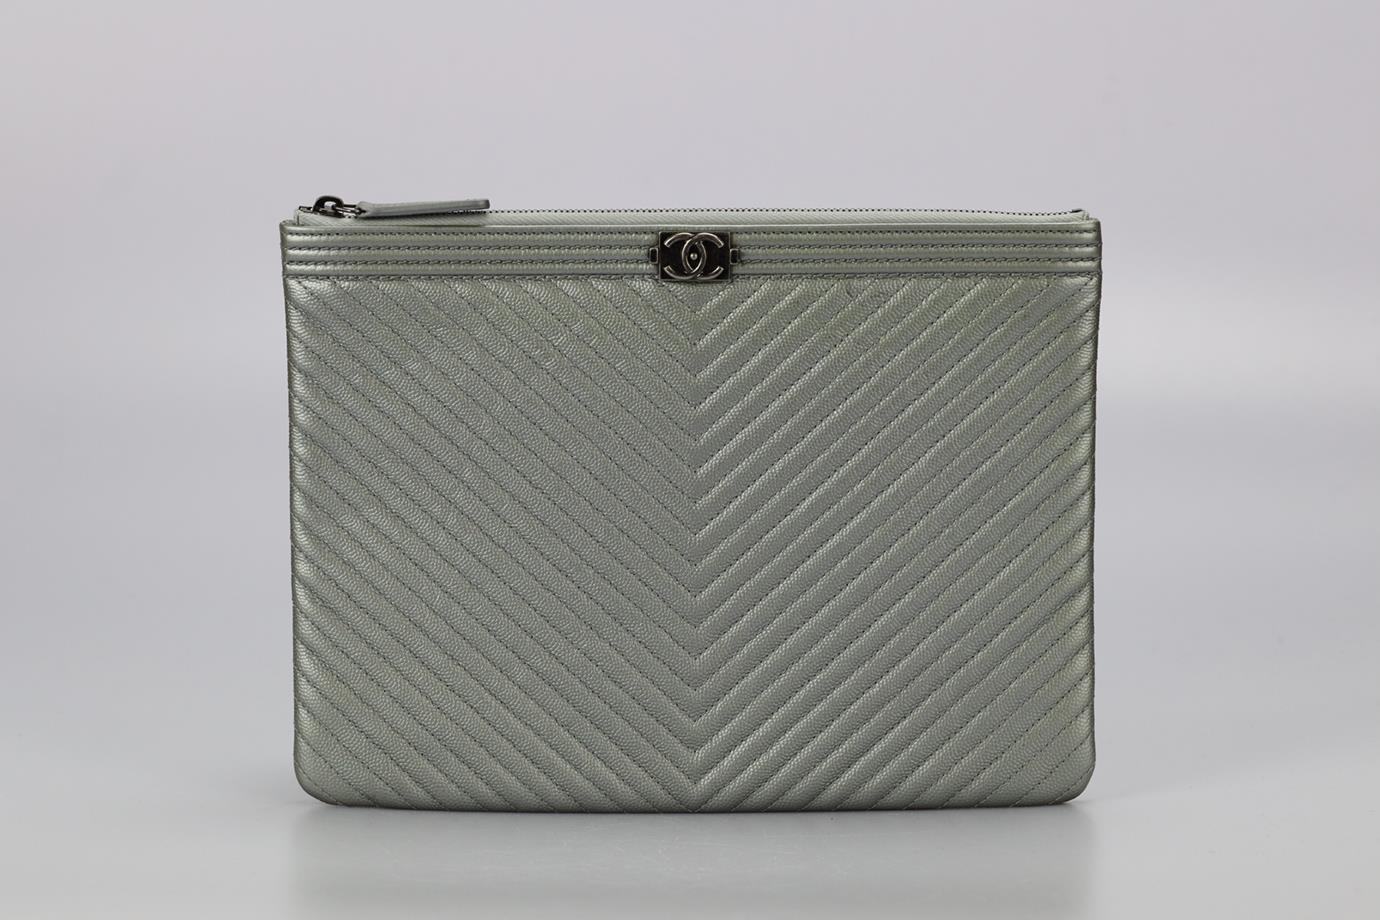 Chanel 2017 Cassic Boy O-case Chevron Caviar Leather Clutch. Silver. Zip fastening - Top. Comes with - authenticity card. Does not come with - dustbag or box. Height: 7.5 in. Width: 10.6 in. Depth: 0.4 in. Condition: Used. Very good condition -